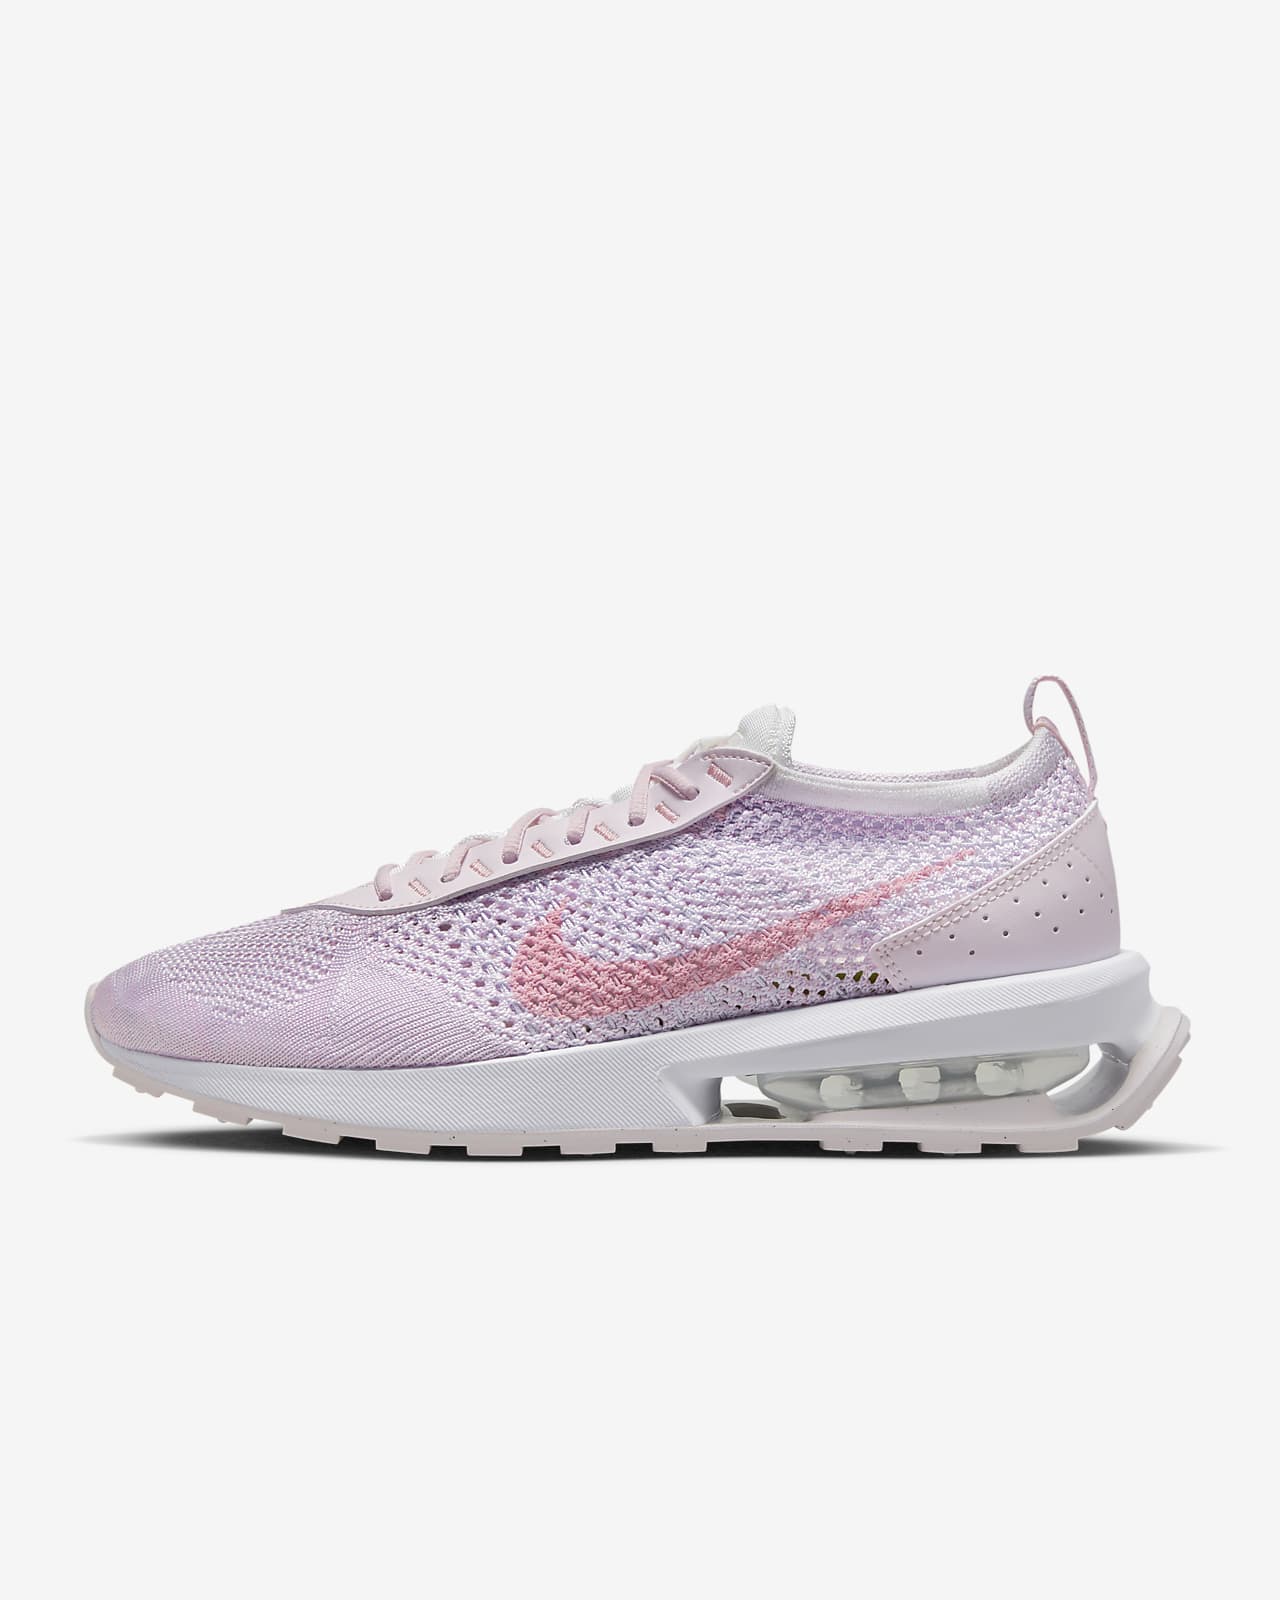 nok hat dome Nike Air Max Flyknit Racer Next Nature Women's Shoes. Nike.com